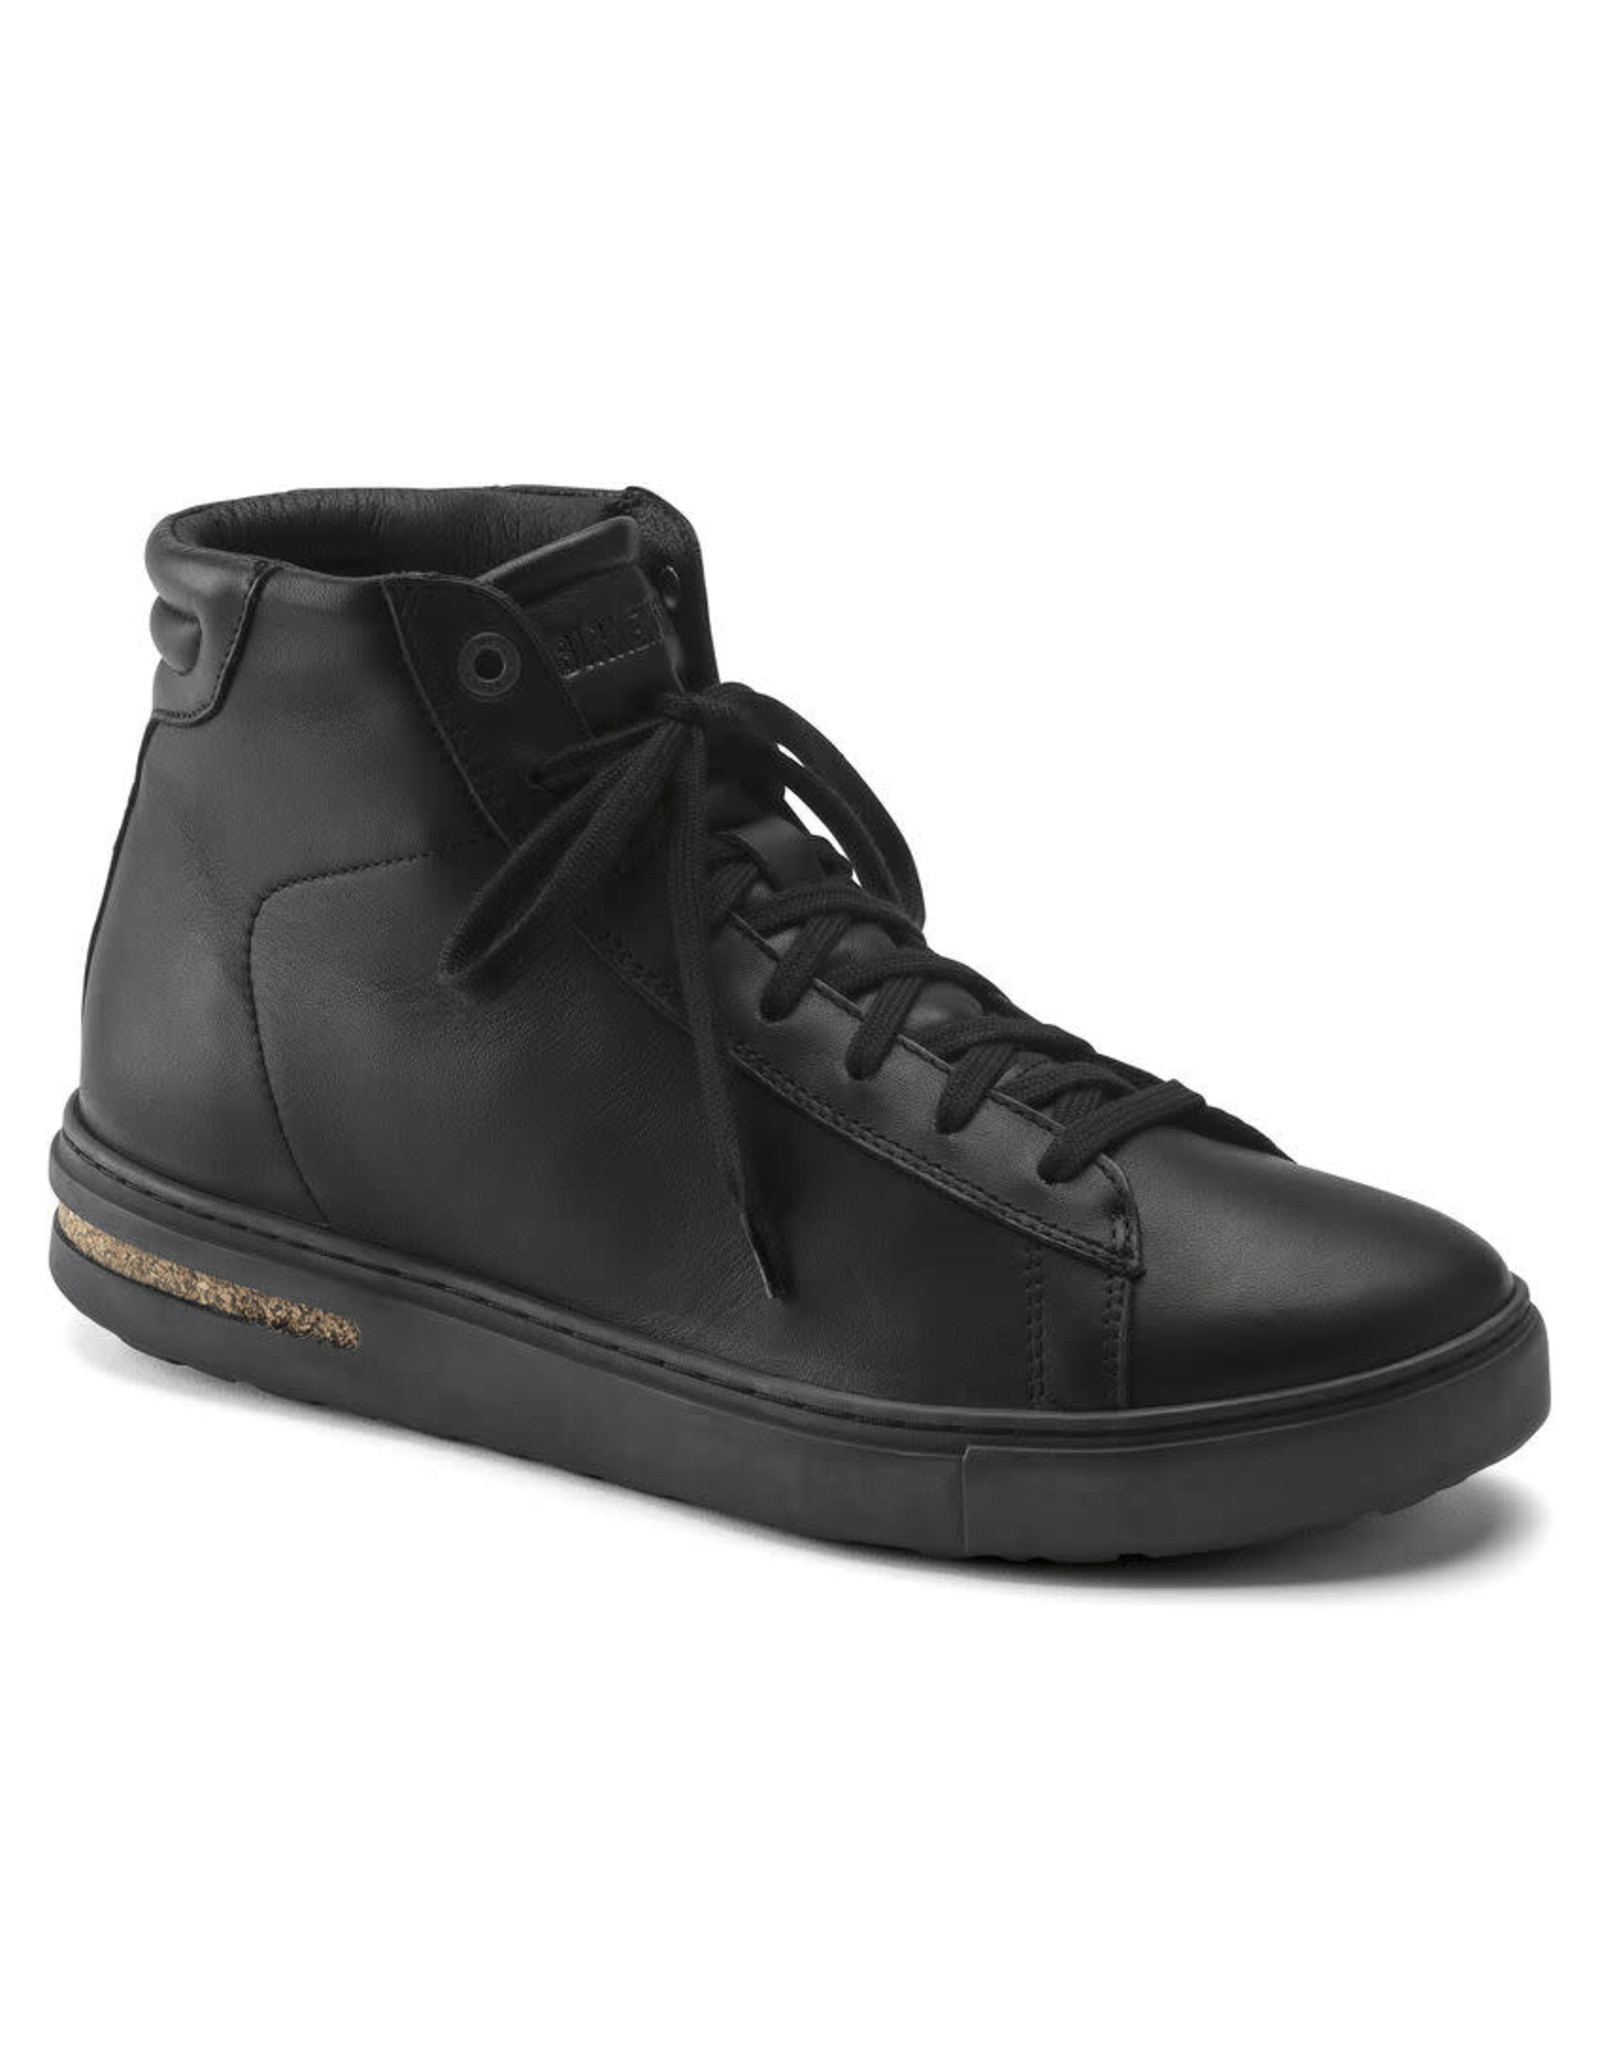 Bend Mid Smooth Leather Black REGULAR BE-BLLE-R 1020322